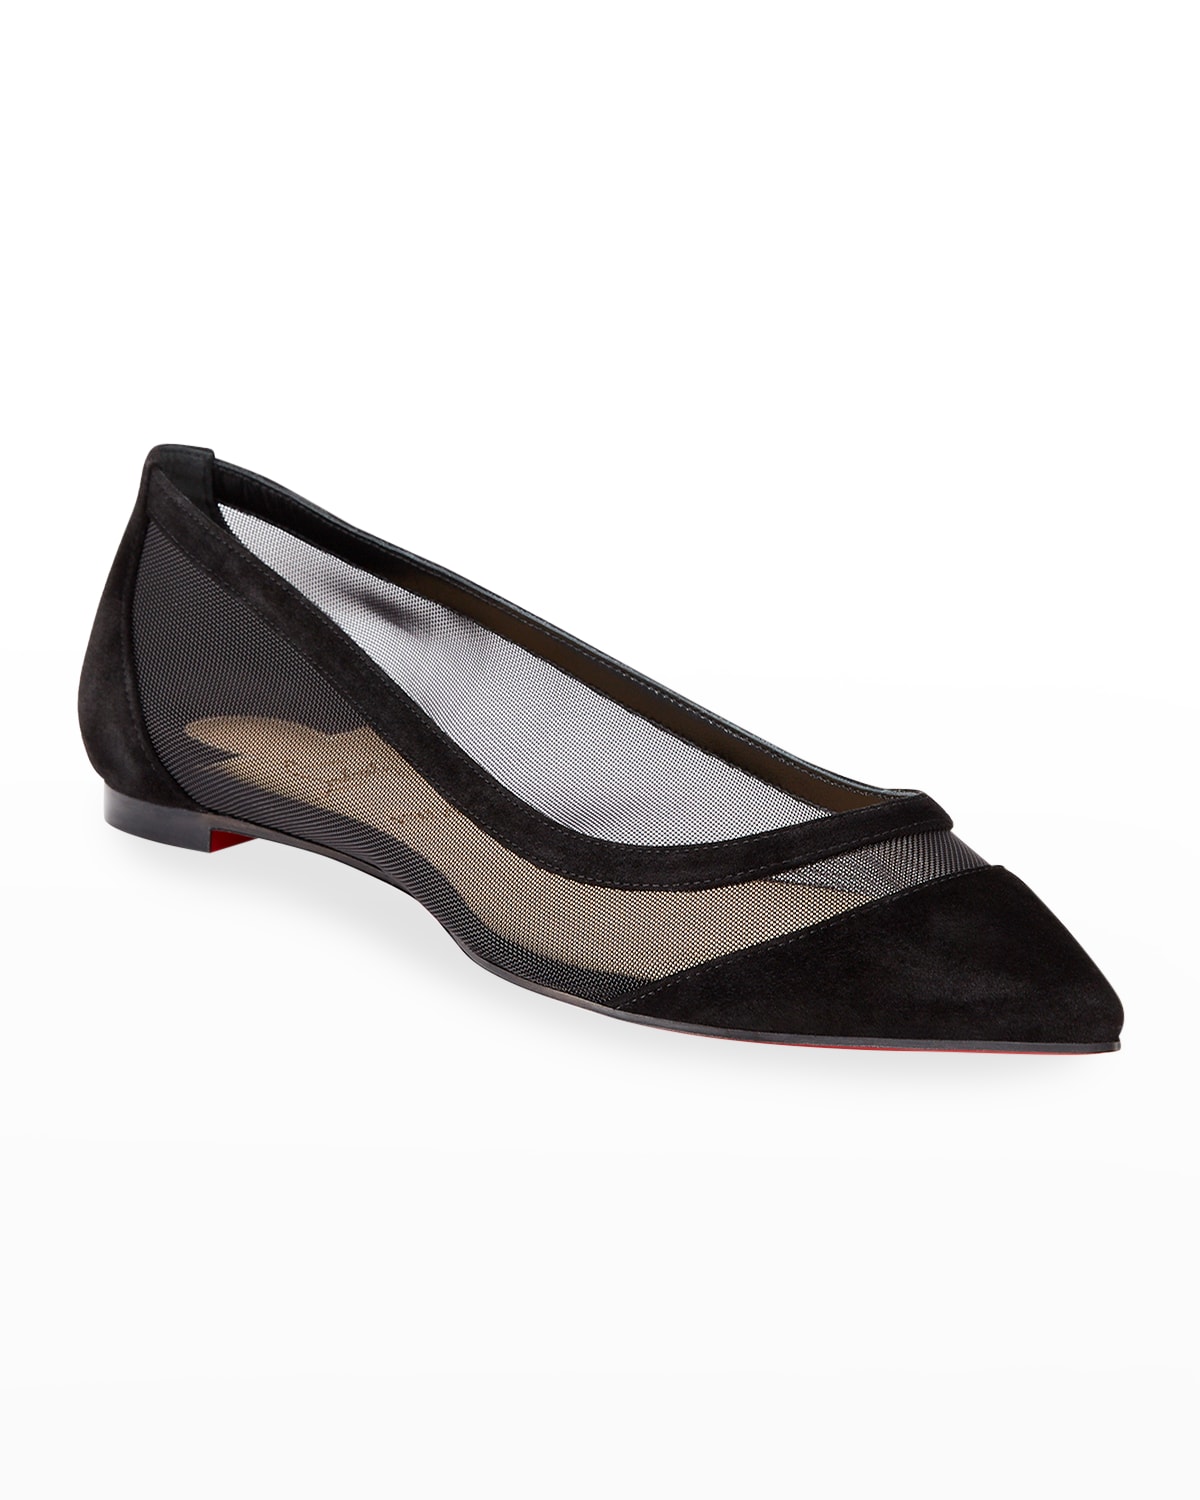 Christian Louboutin Galativi Mesh Pointed Red Sole Flats